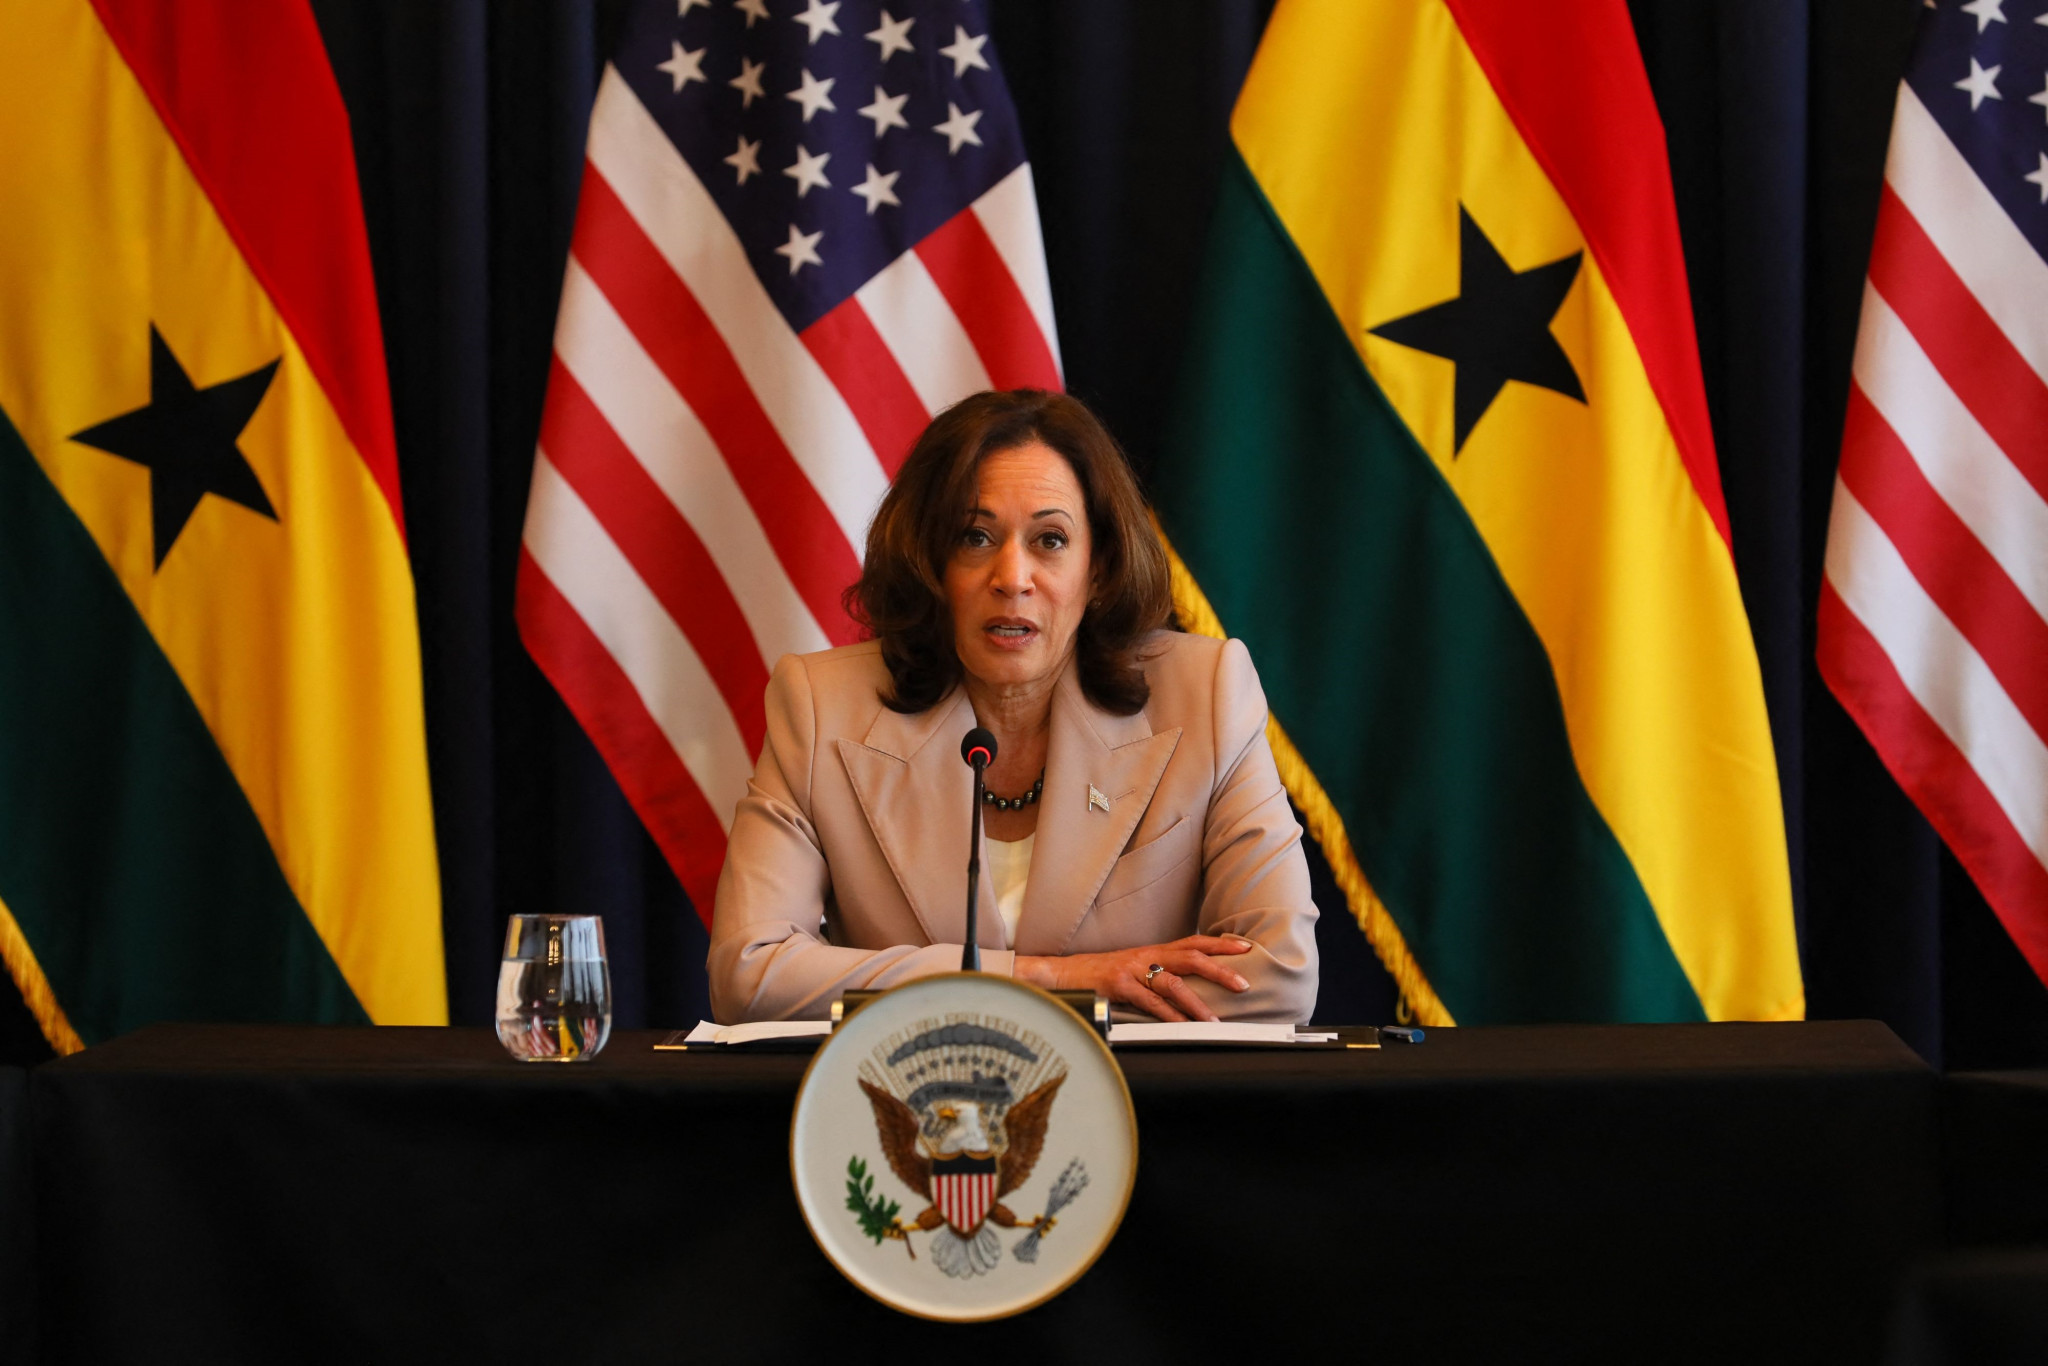 United States vice-president Kamala Harris slammed plans to criminalise same-sex relationships during a visit to Accra earlier this year ©Getty Images